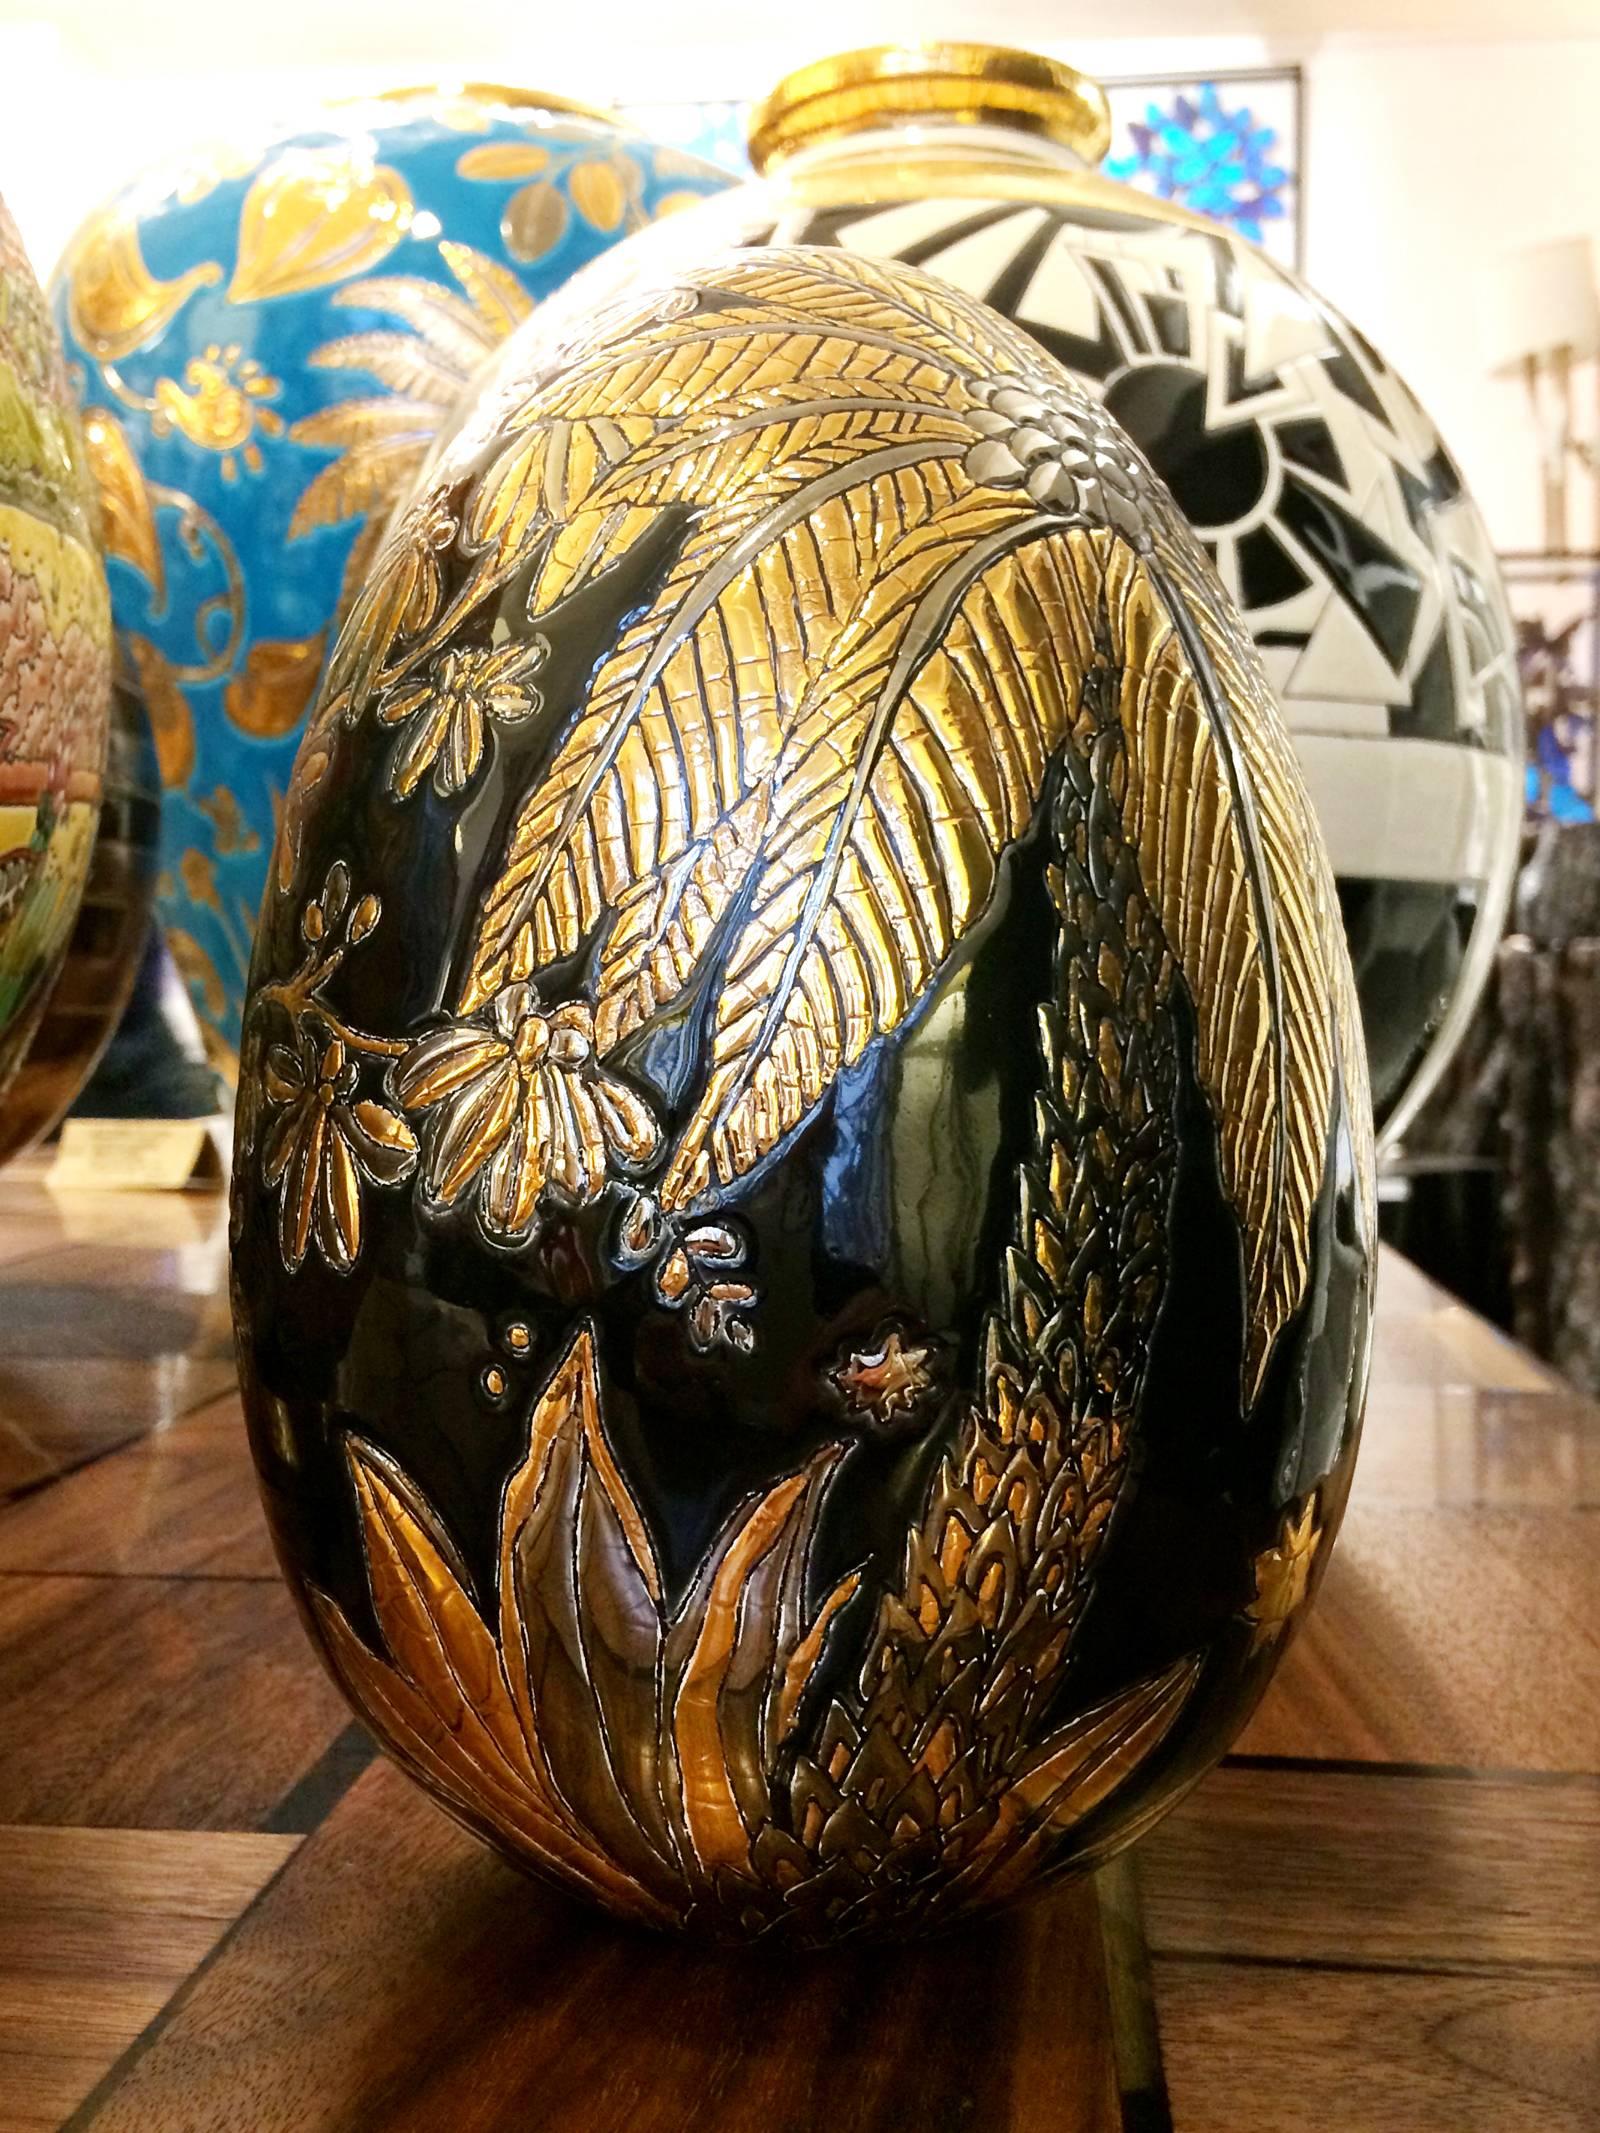 Egg Jungle Dream black and gold,
Emaux de Longwy from France, 2017
Colonial Egg. Earthenware handcrafted.
